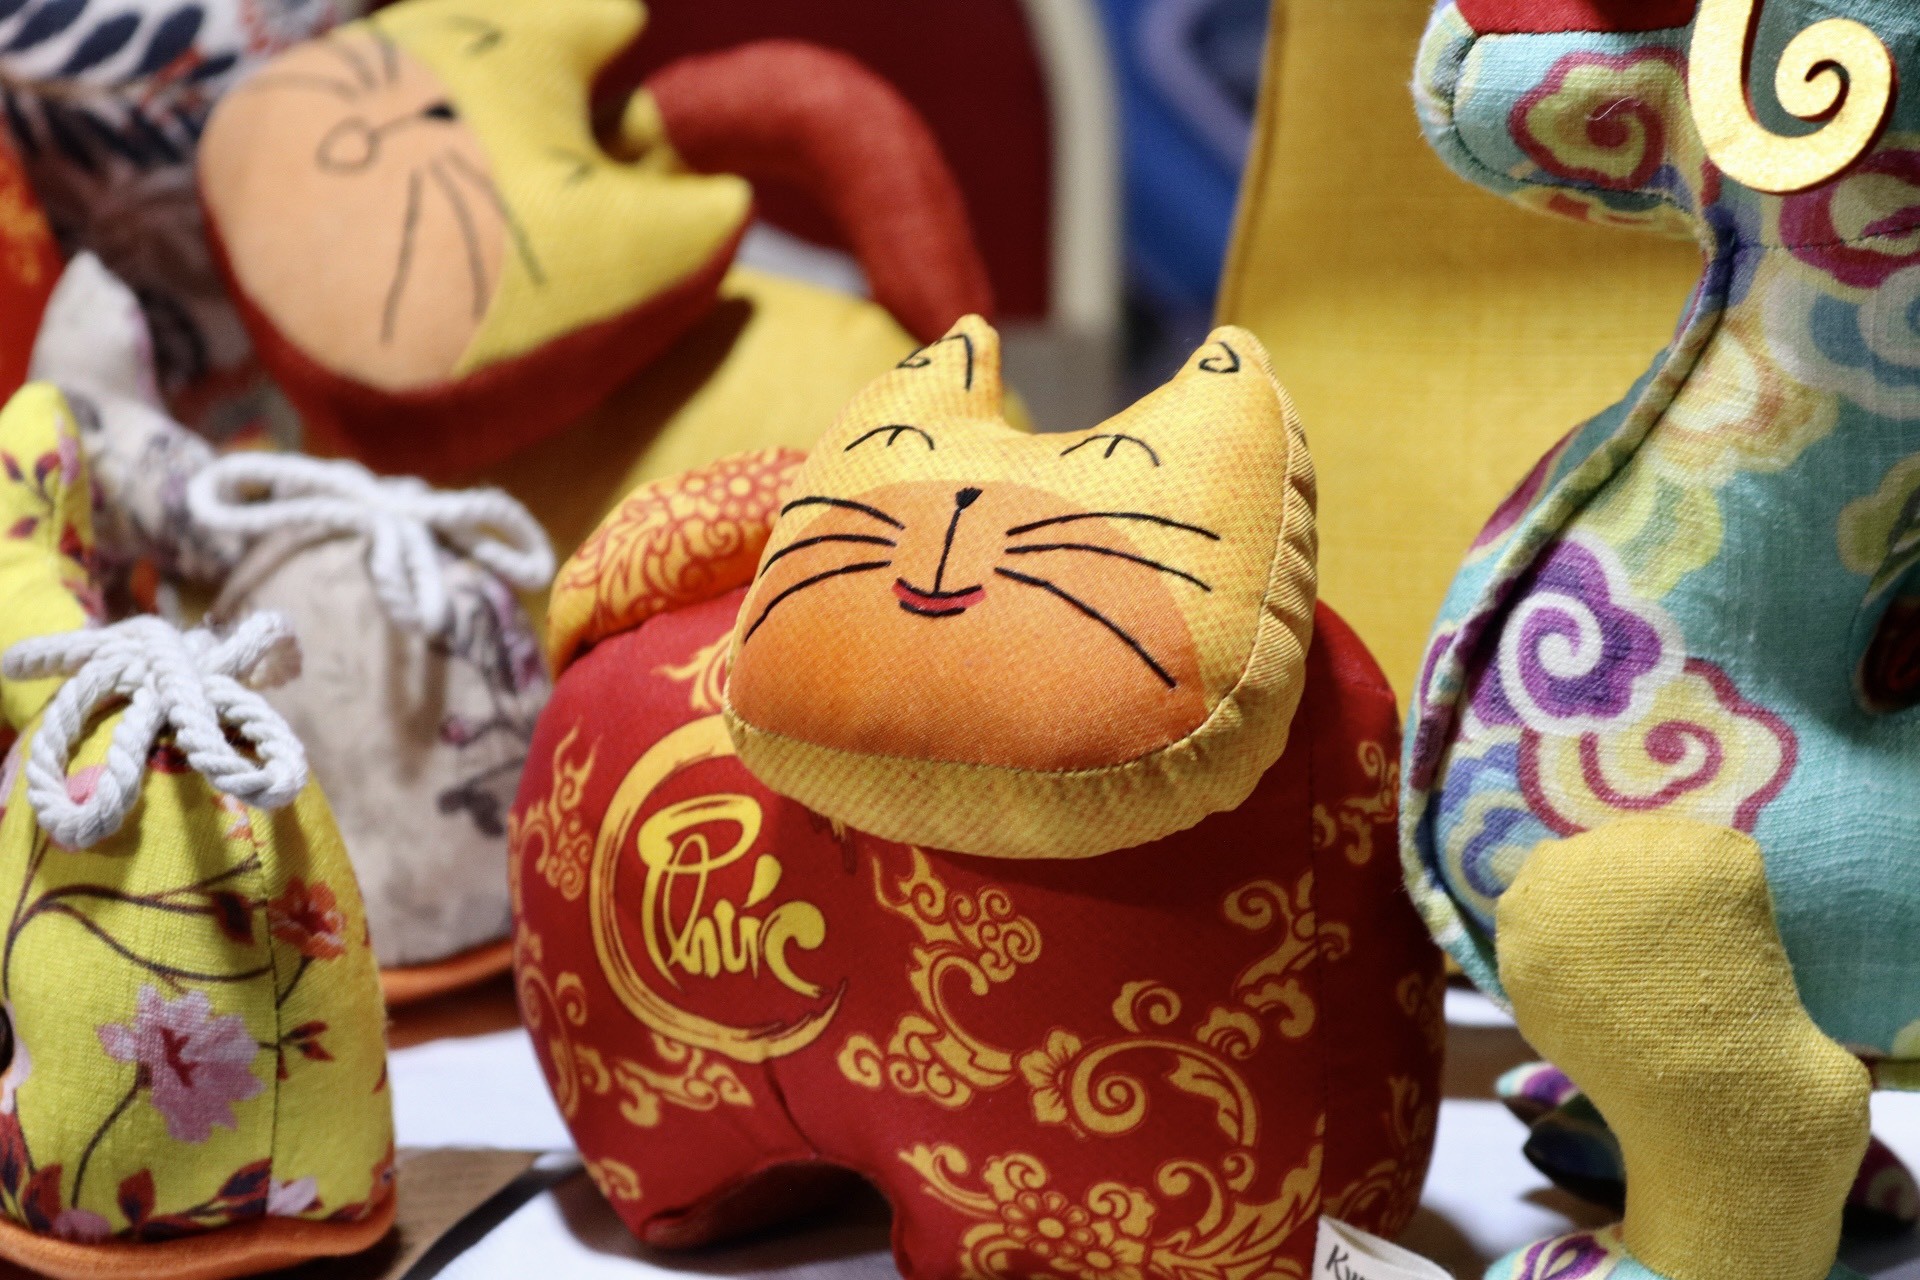 Handicrafts and handmade items attract customers at the Capital's souvenir fair photo 15